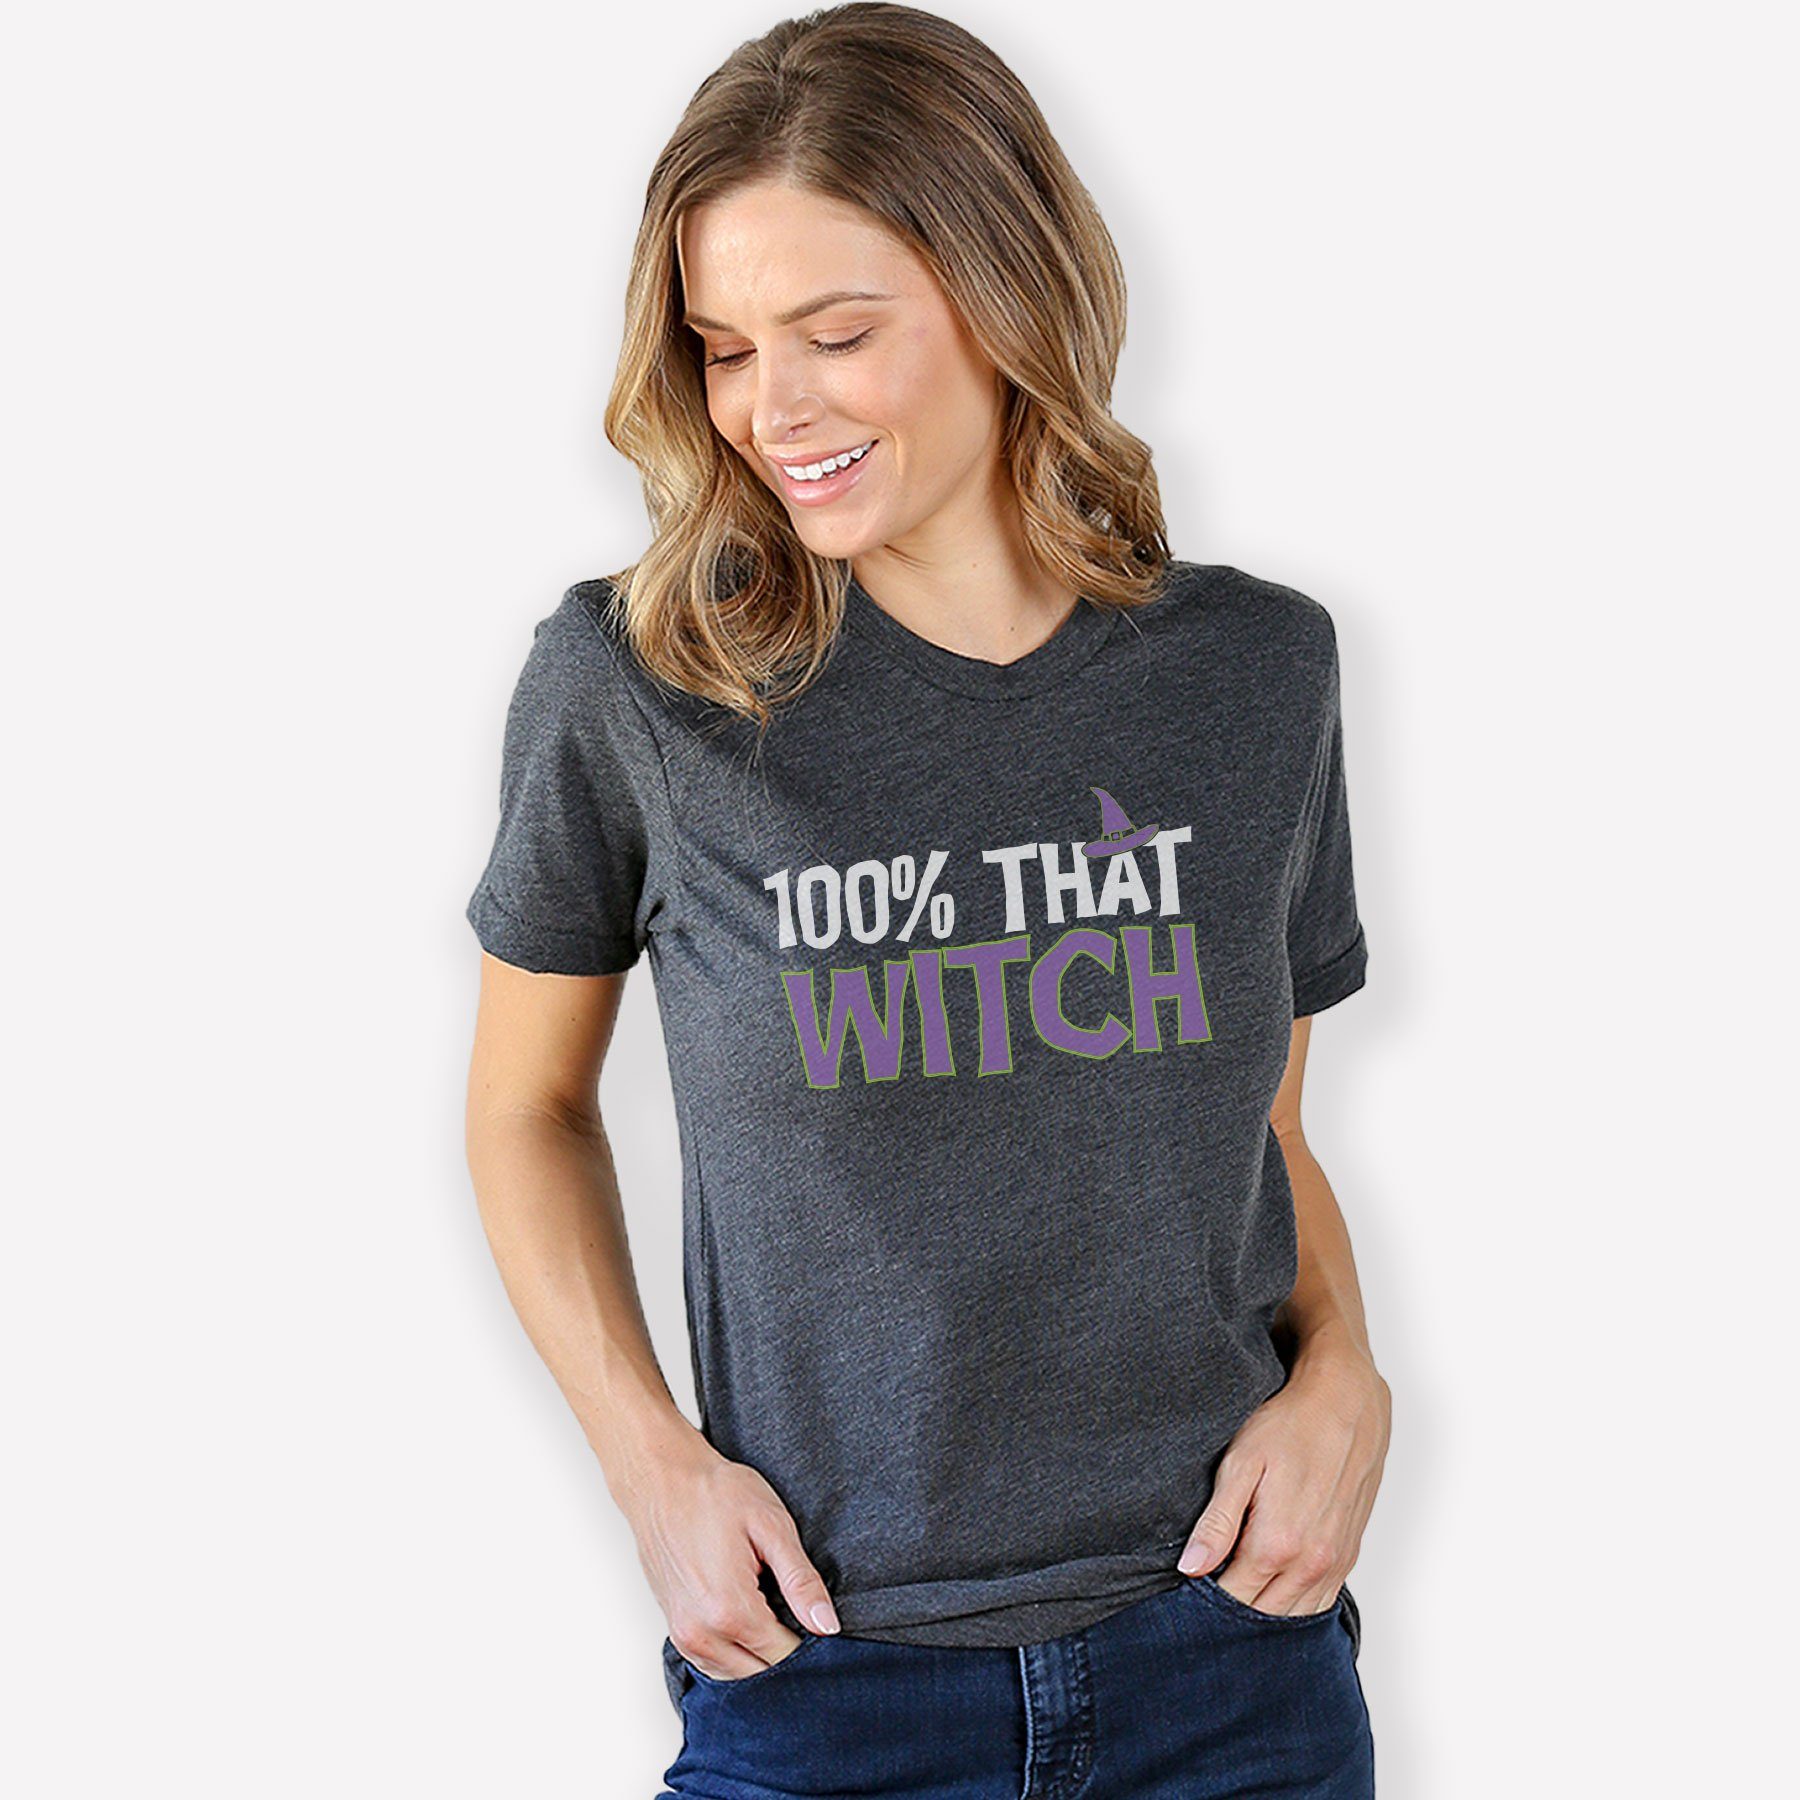 100% That Witch Crew neck The Home T